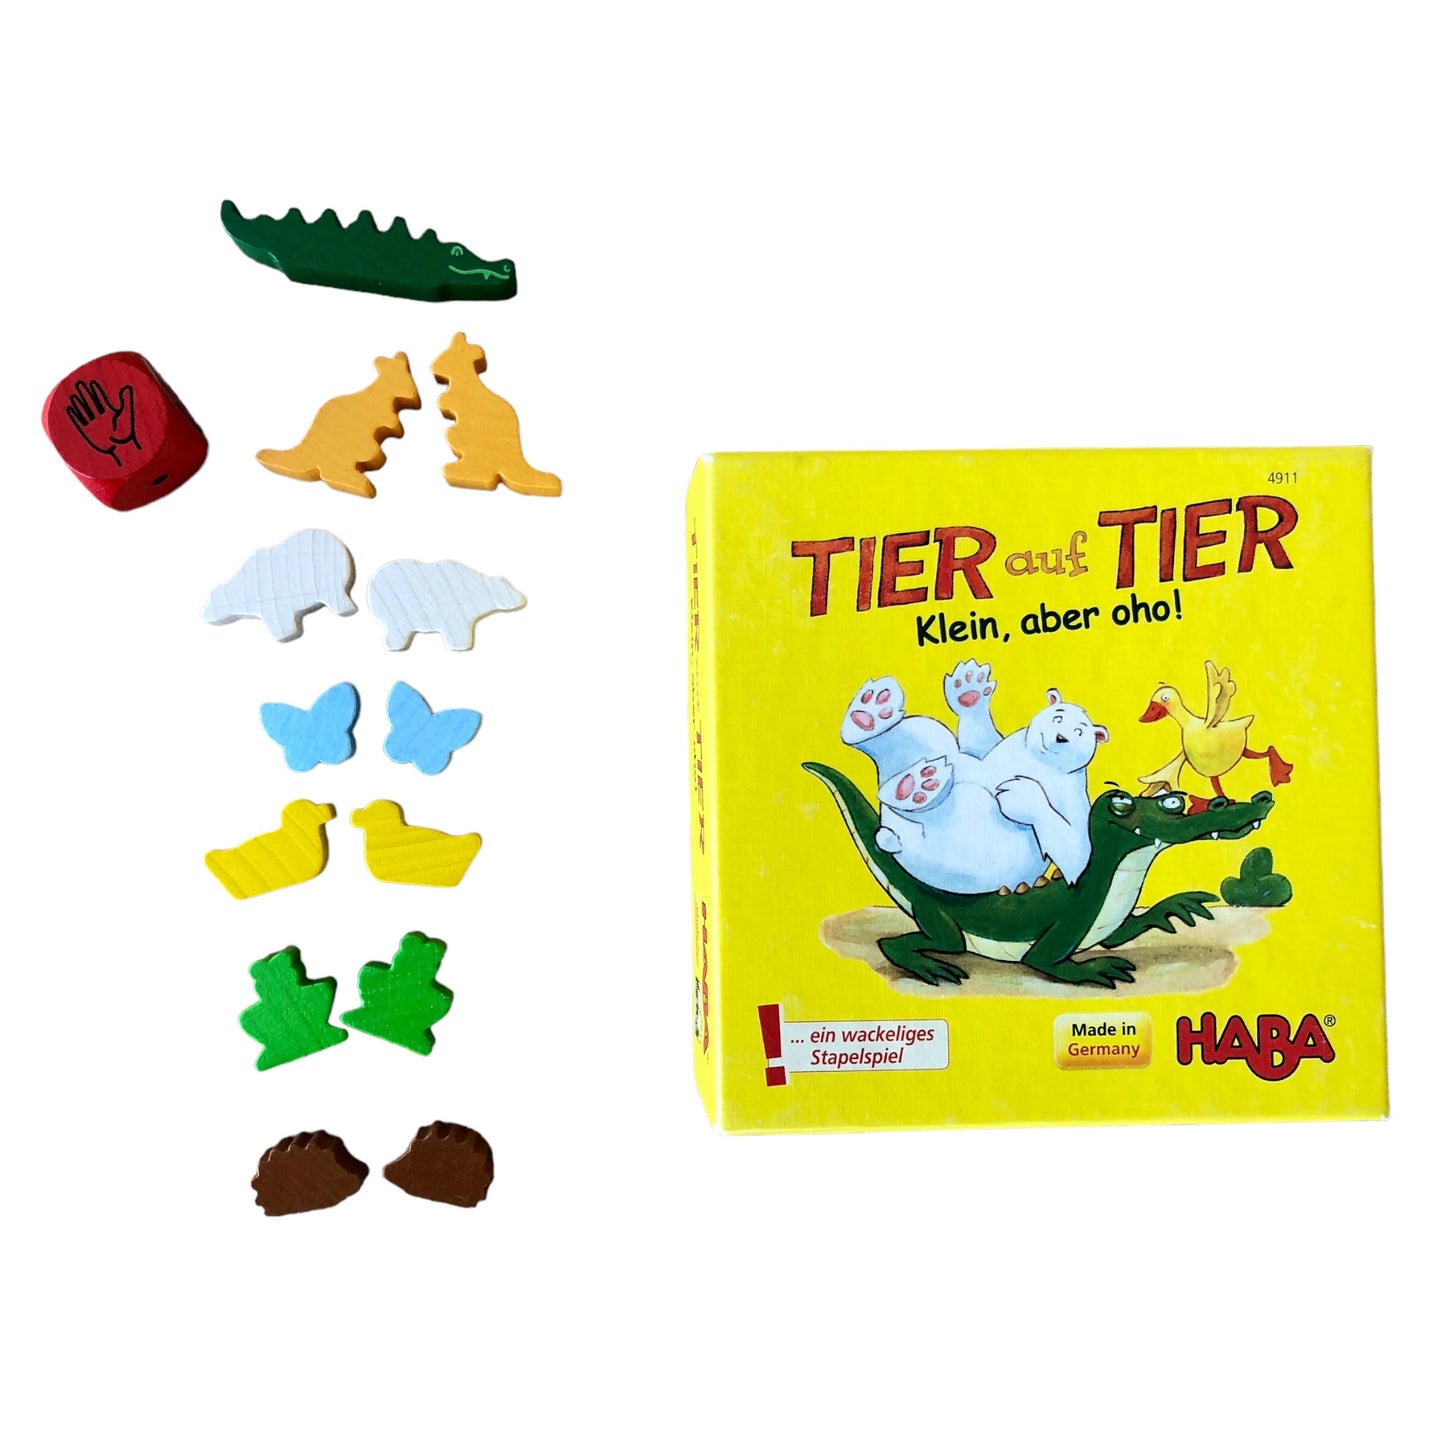 Set of 2 game boards travel edition: Tier auf Tier and Mimik Memo